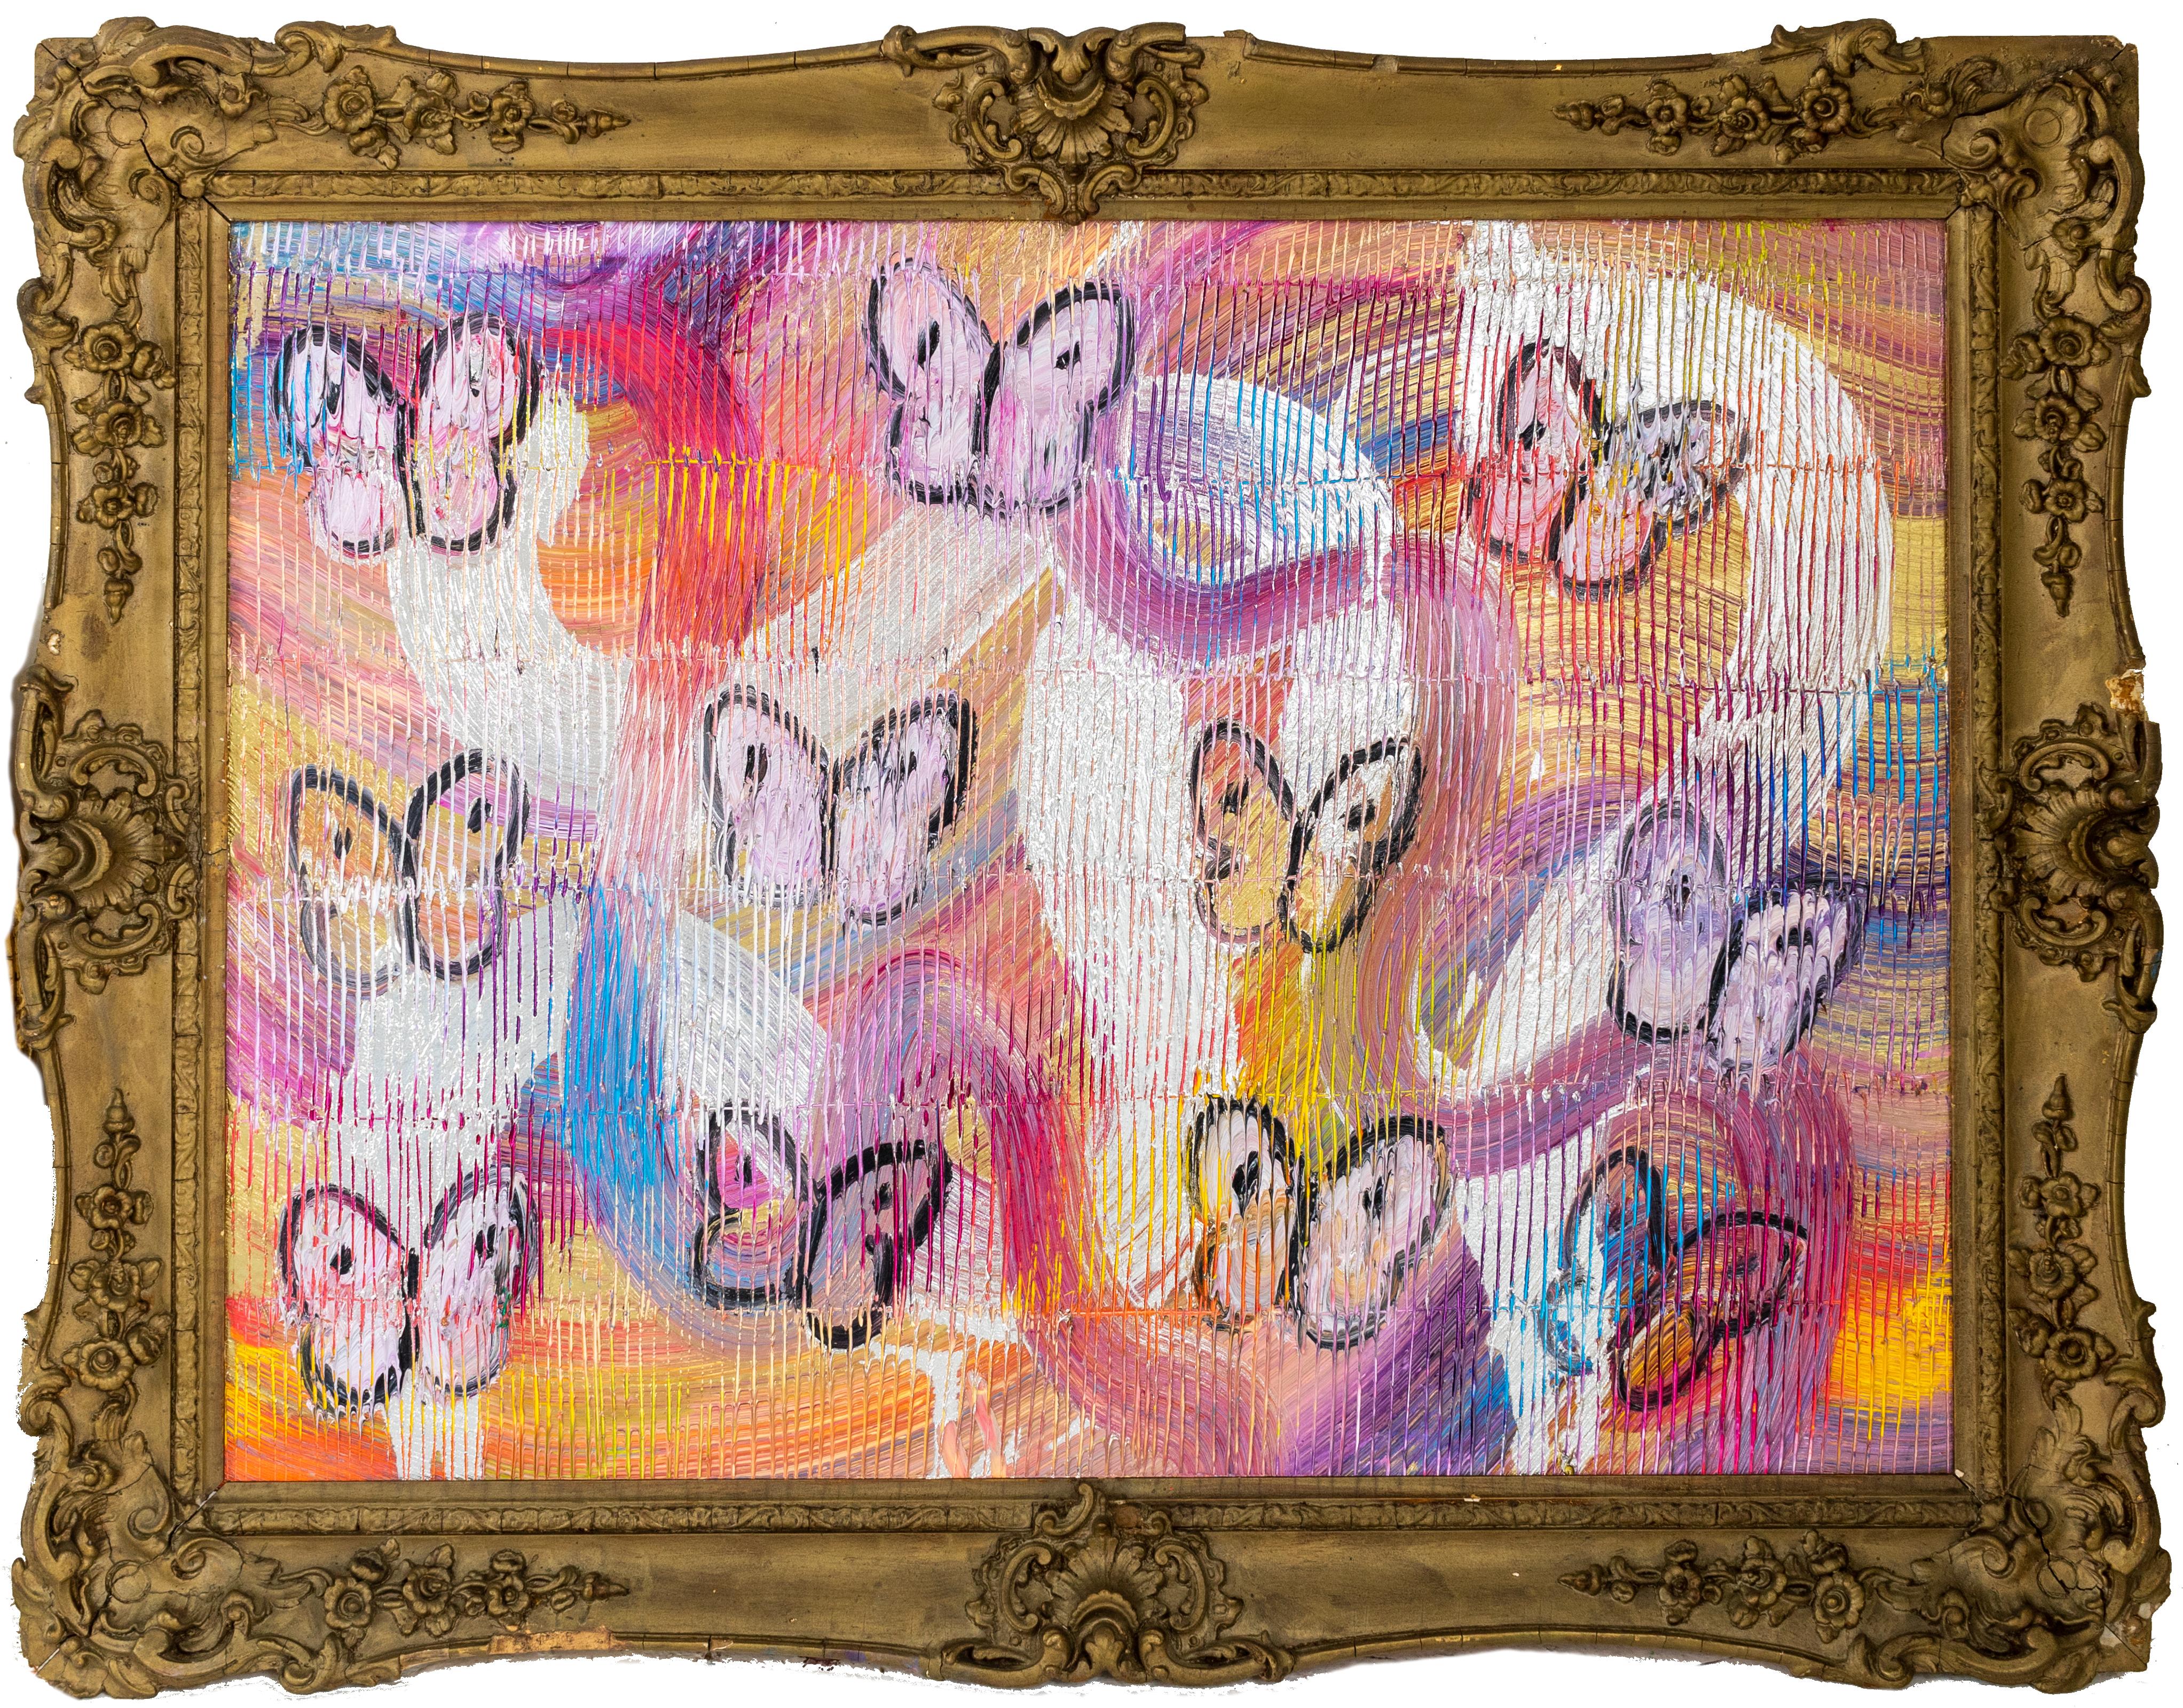 Hunt Slonem "Pallet" Multicolored Metallic Butterflies
Black outlined butterflies in shades of pink, purple, and orange on a multicolored metallic background in an antique frame

Unframed: 22 x 30 inches  
Framed: 29 x 36.5 inches
*Painting is